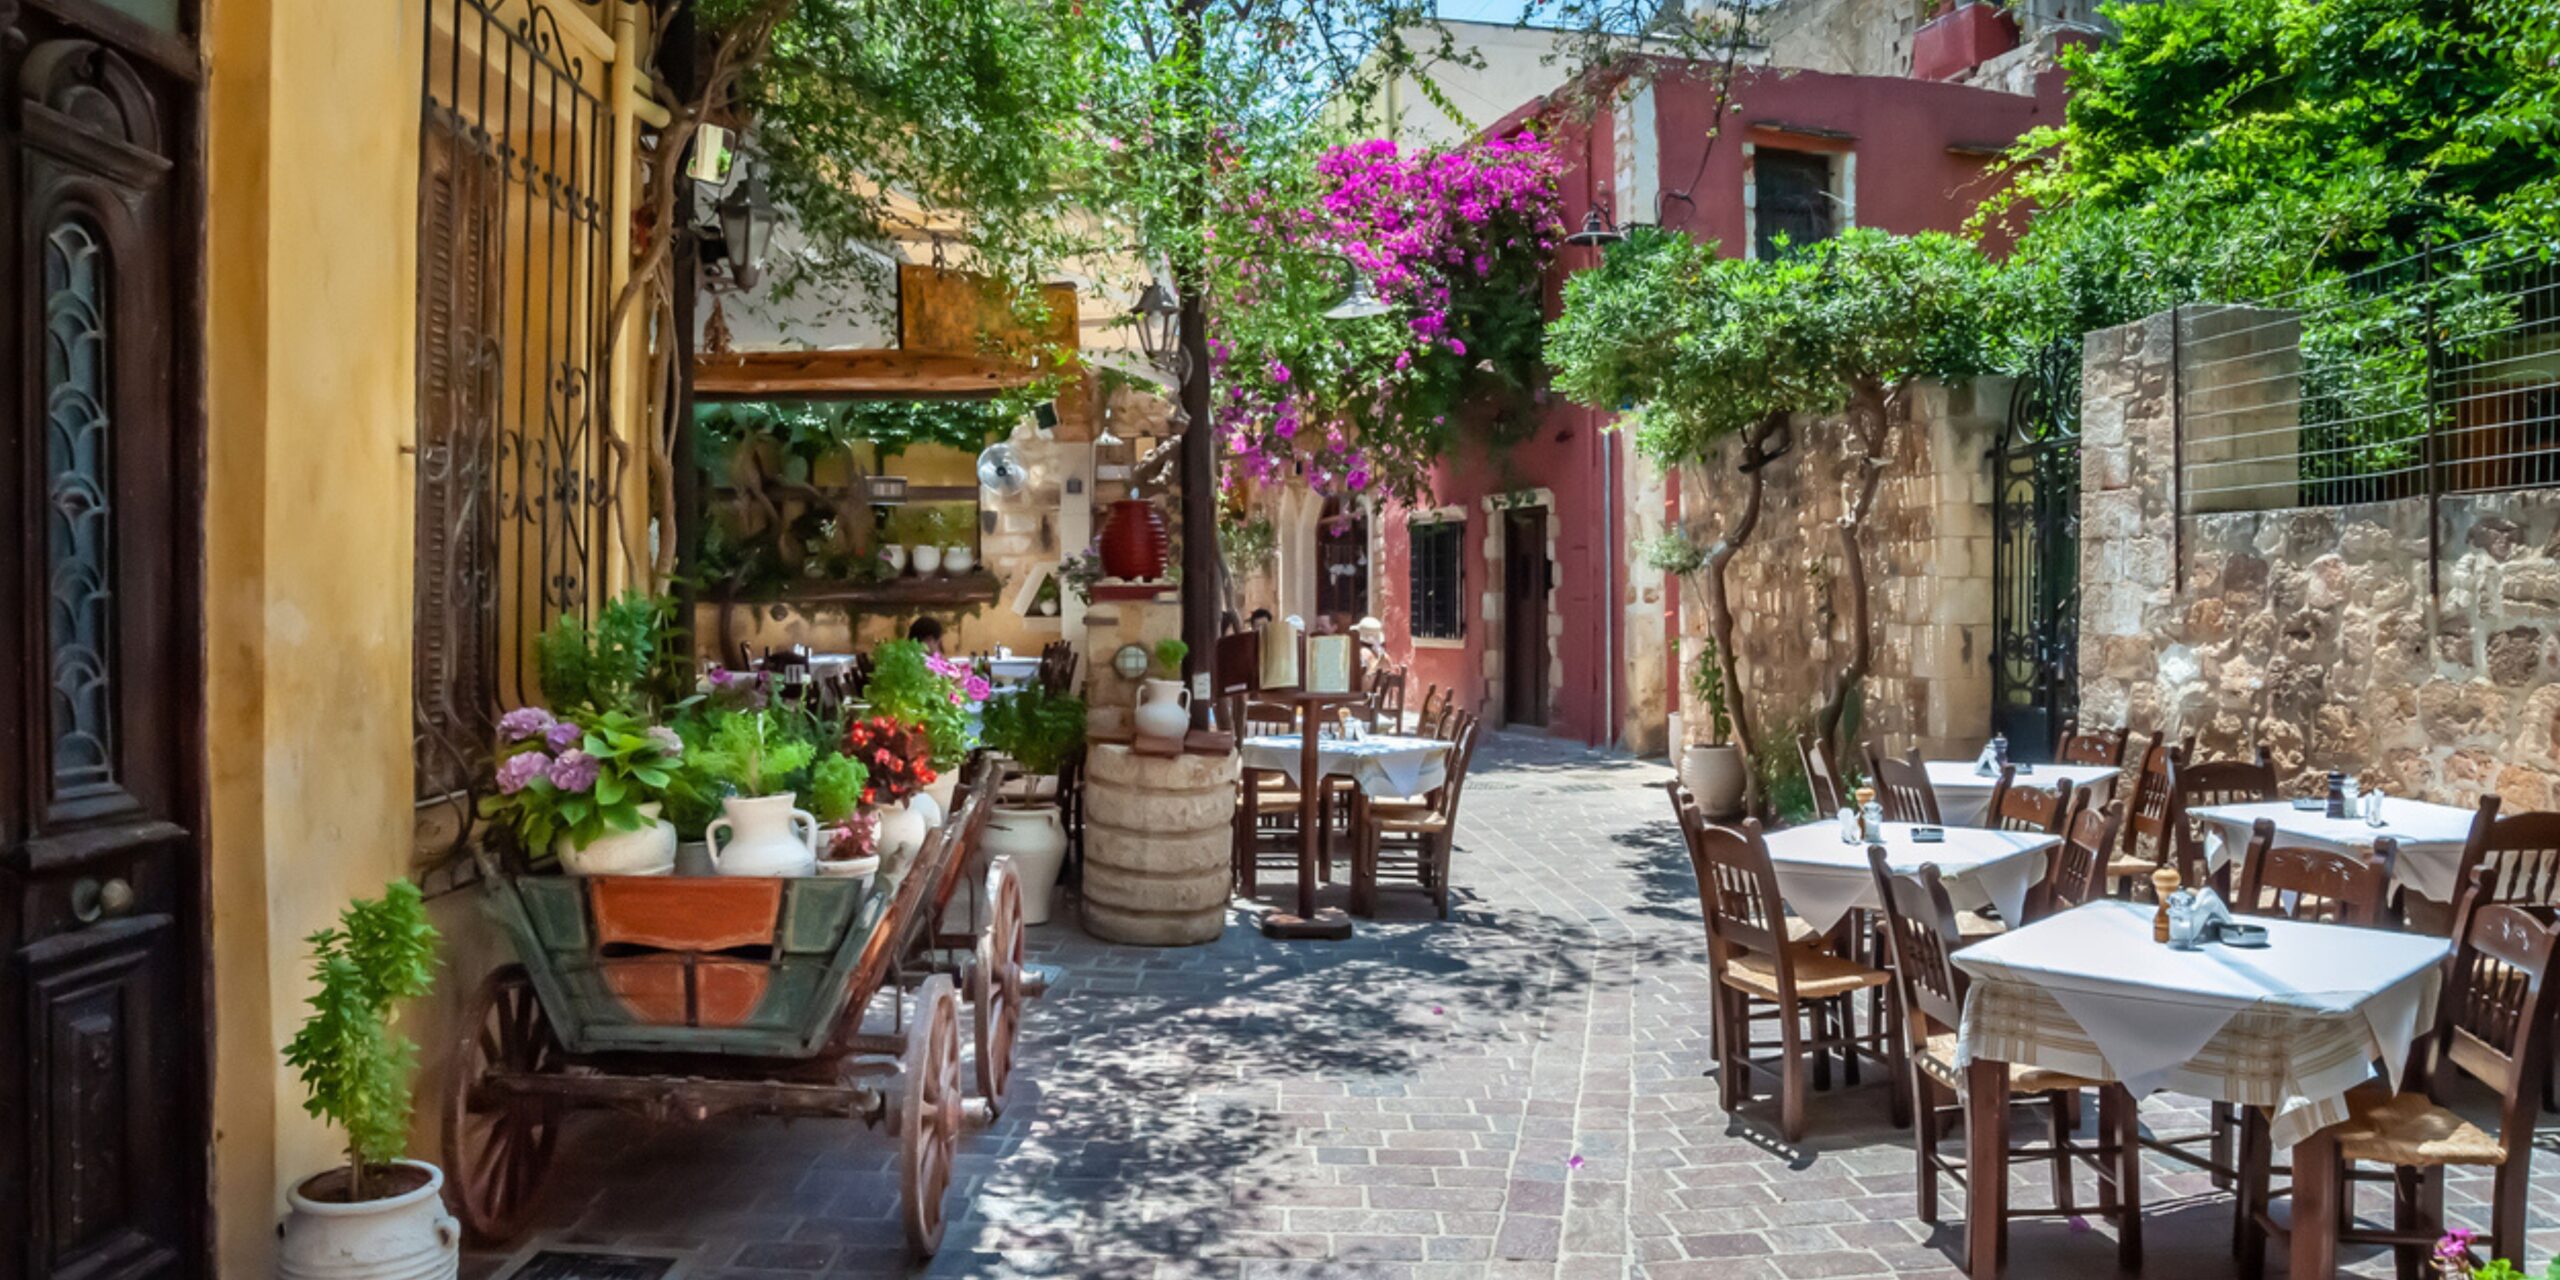 Charming alley with outdoor dining tables, plants, and blooming flowers in an old town.